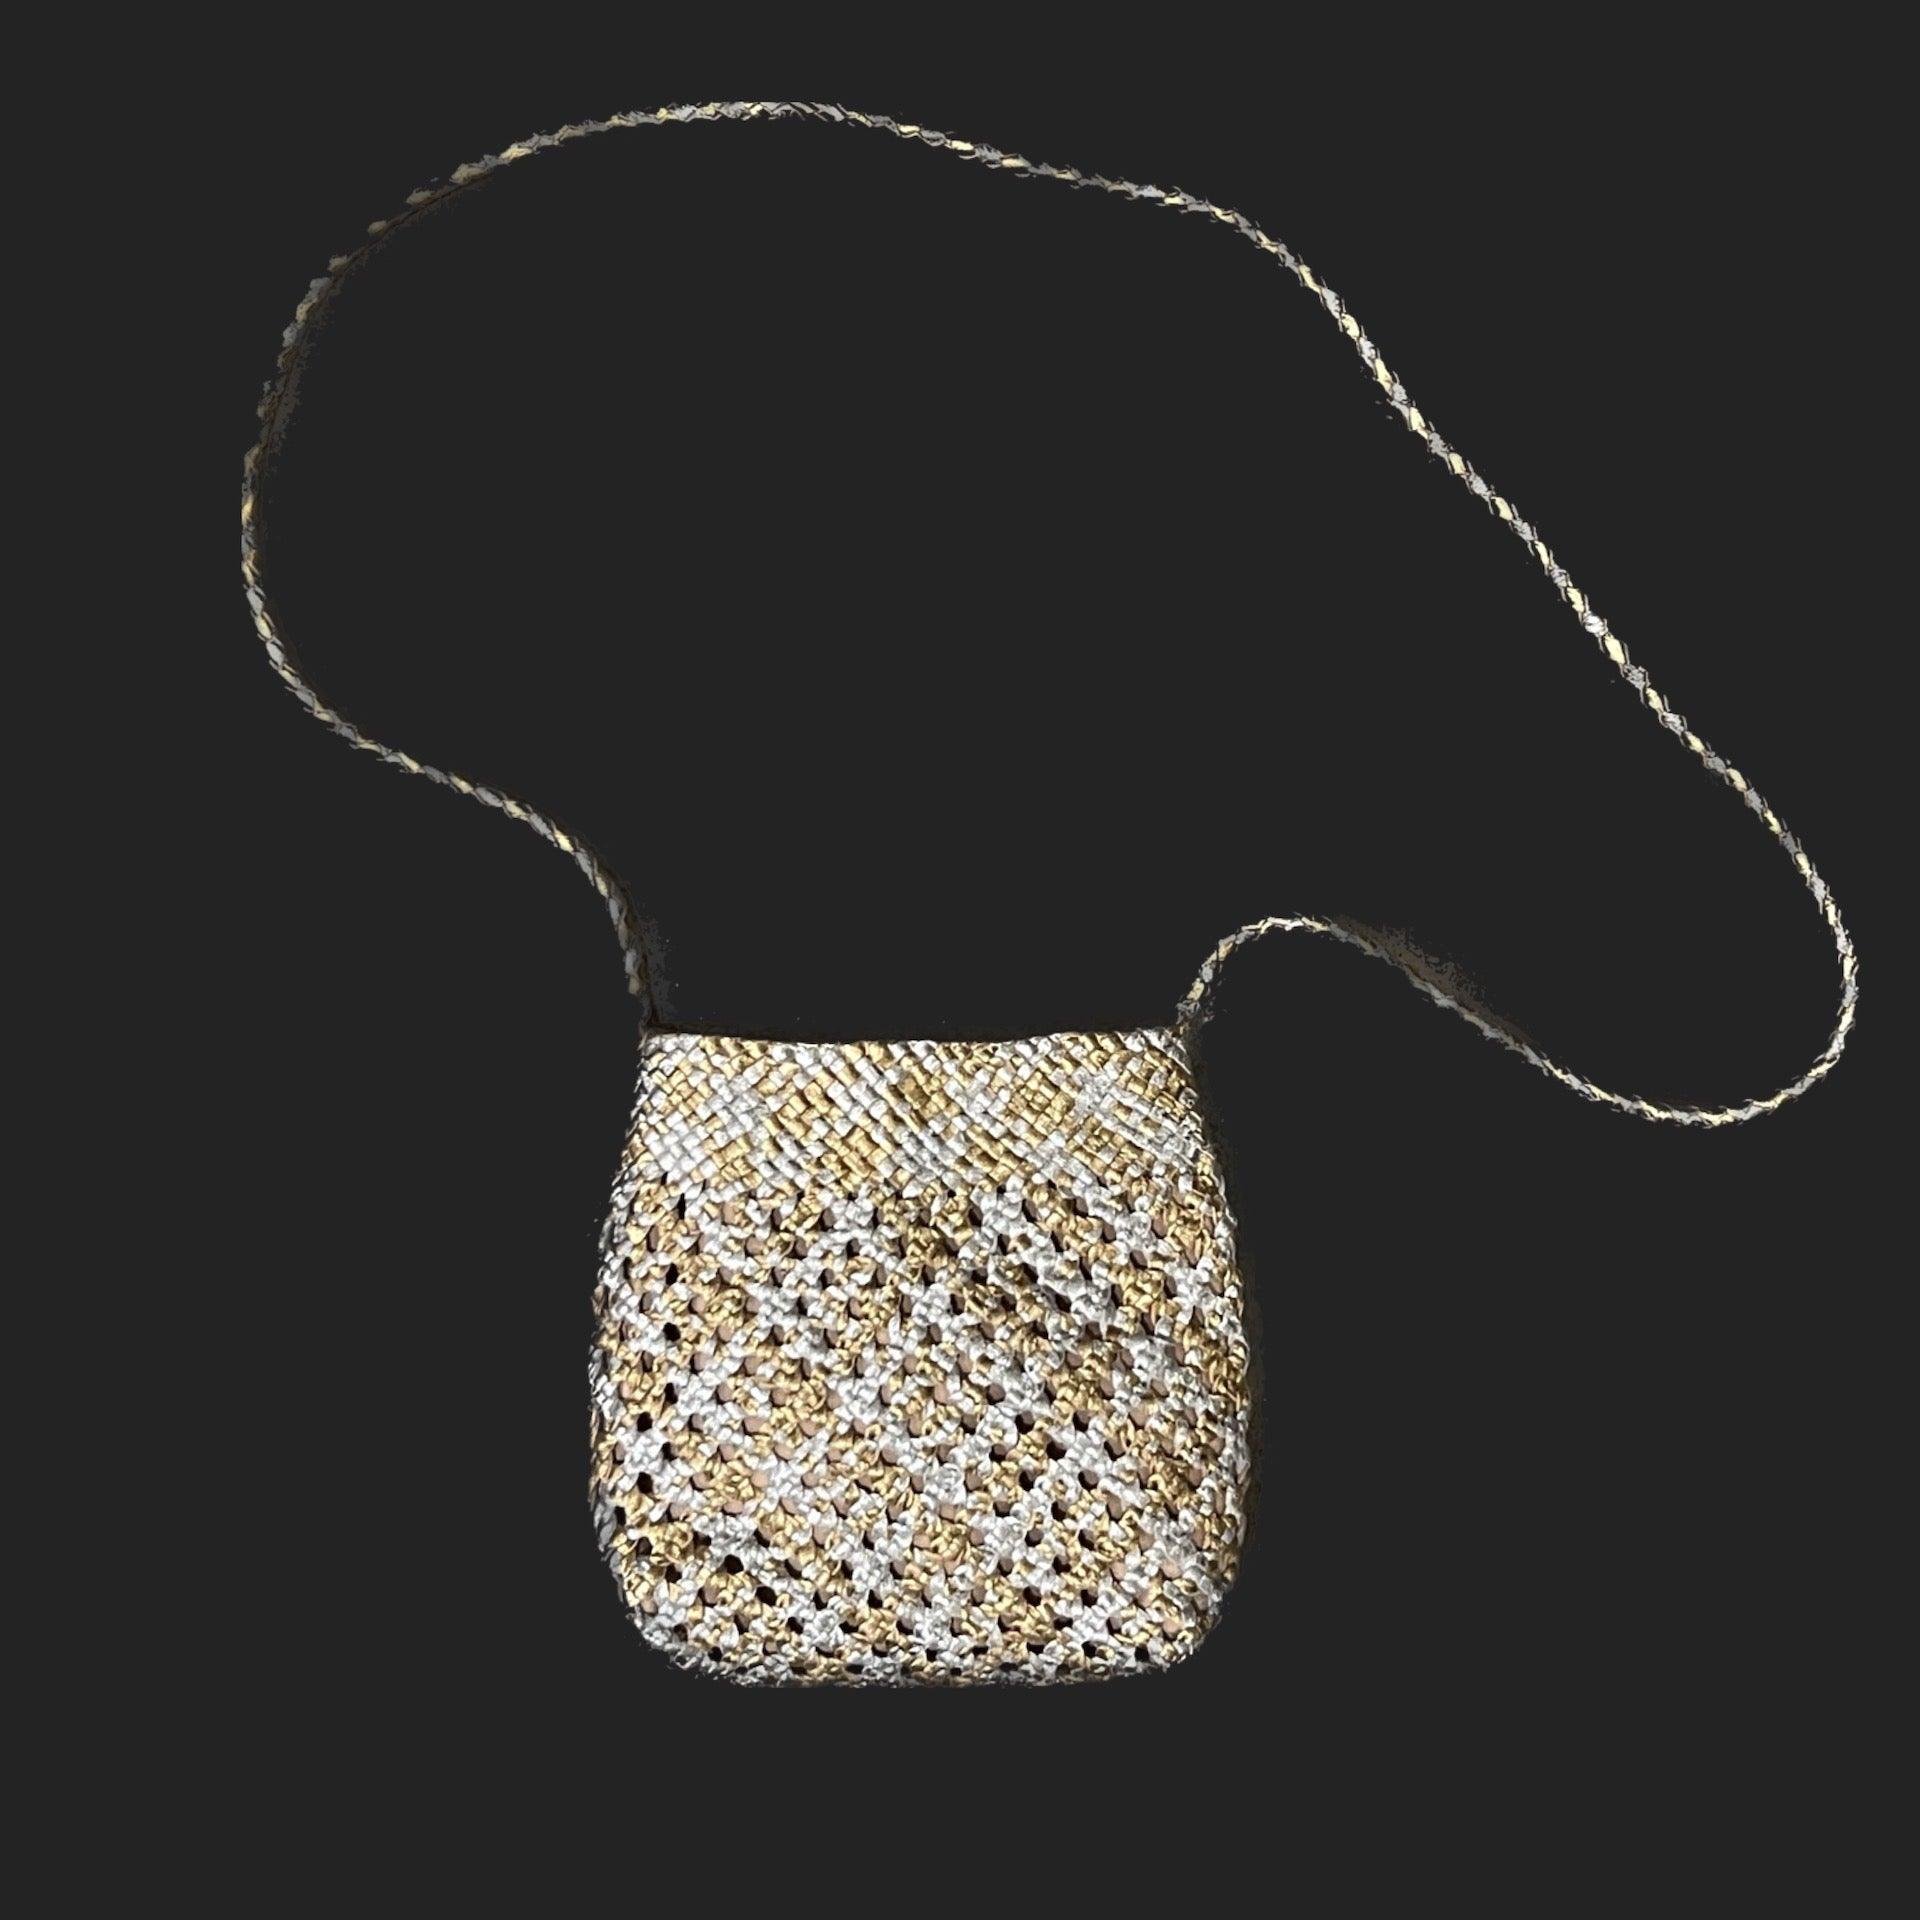 LABEL17 presents Crossbody Bag Lalla Party, Silver Gold, made of supple Lamb-Nappaleather, hand-braided